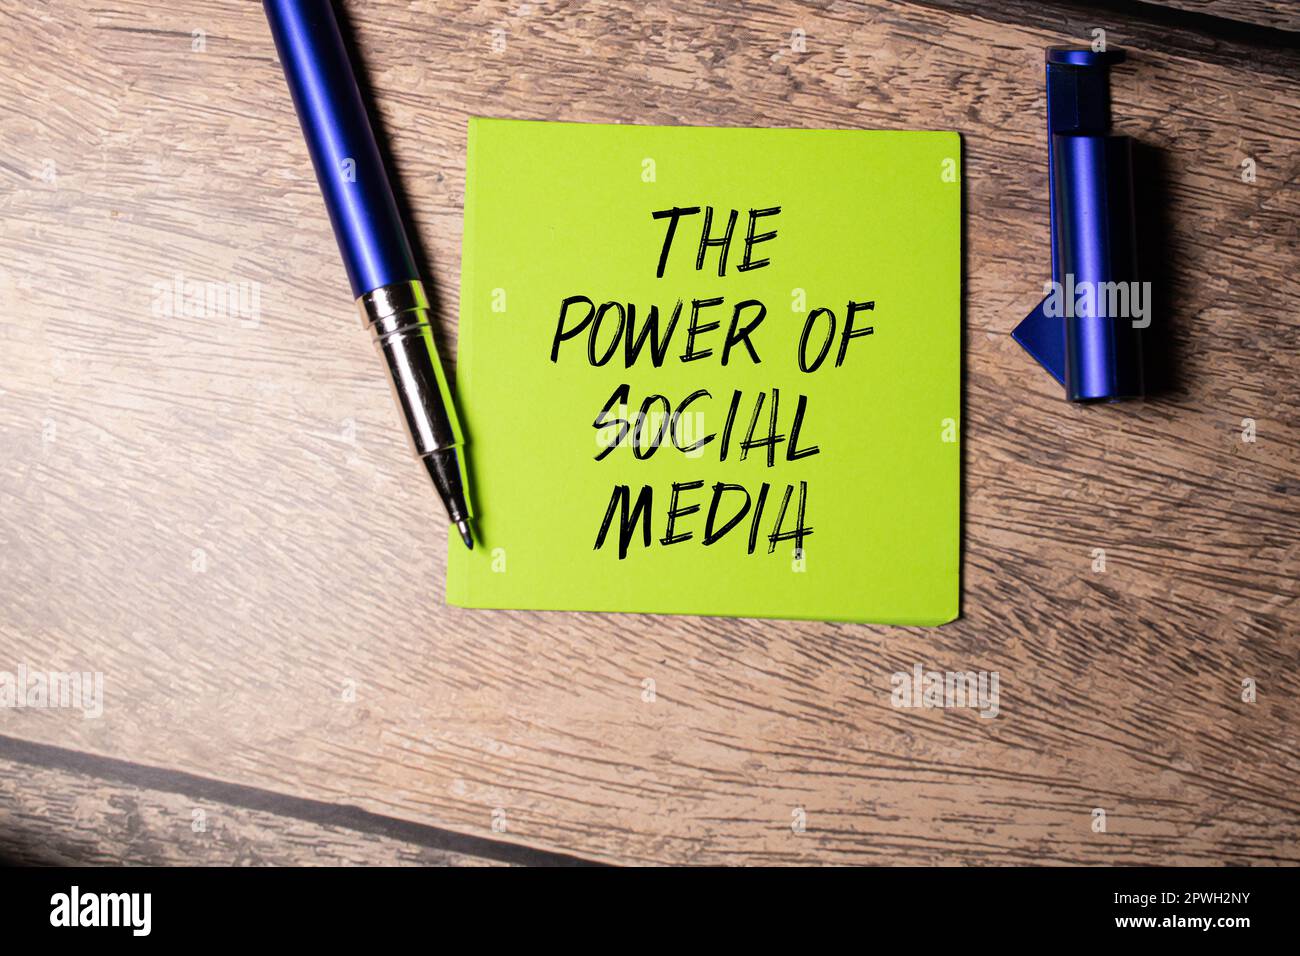 Hand with red pen. Cofee cup. Stick. Keyboard and white background. THE POWER OF SOCIAL MEDIA sign in the notepad Stock Photo